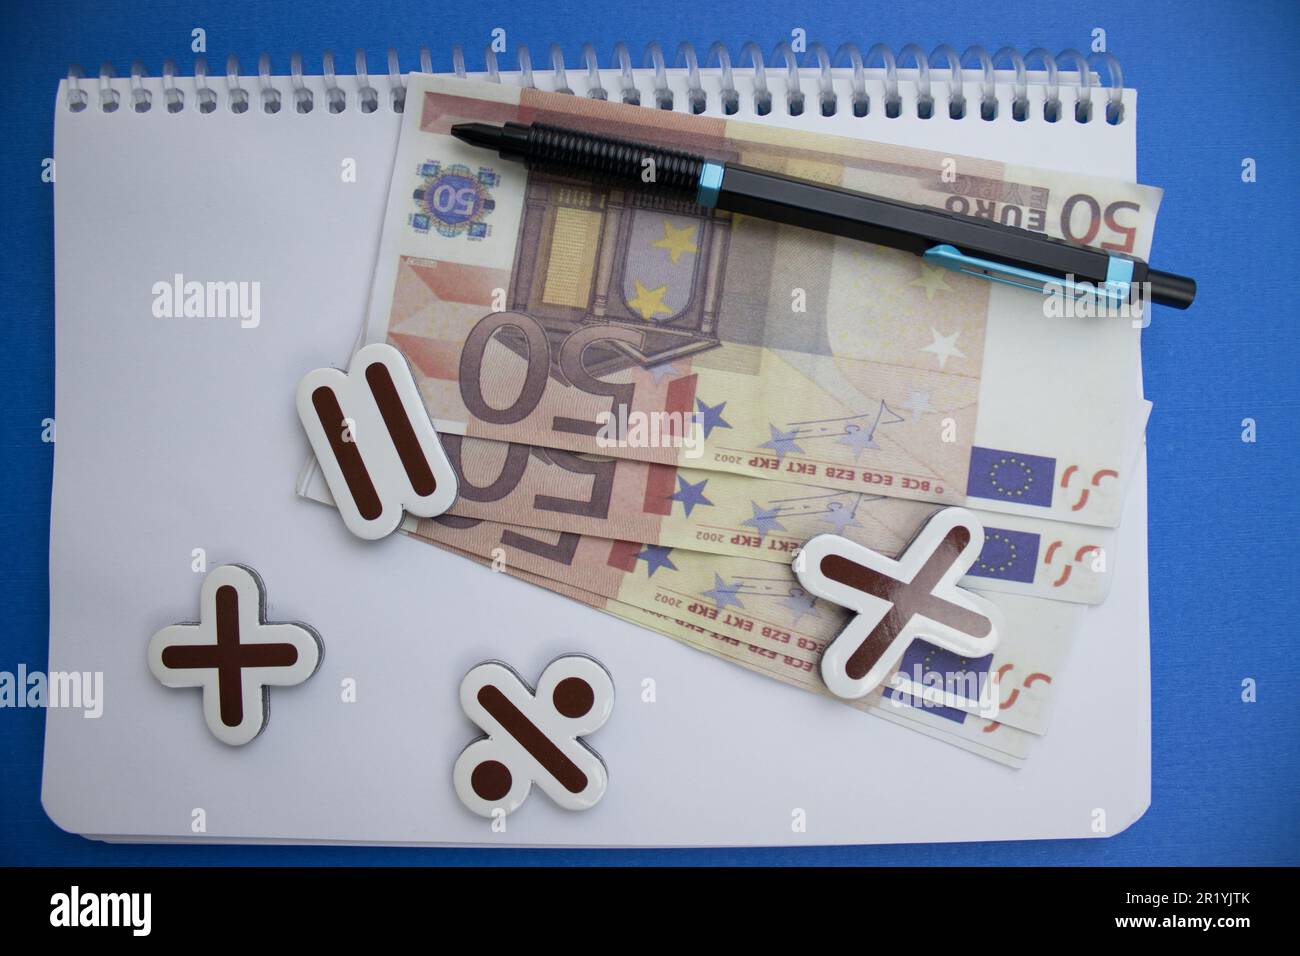 Placed on a blue background, notebook, euros, pencil and math signs. Stock Photo